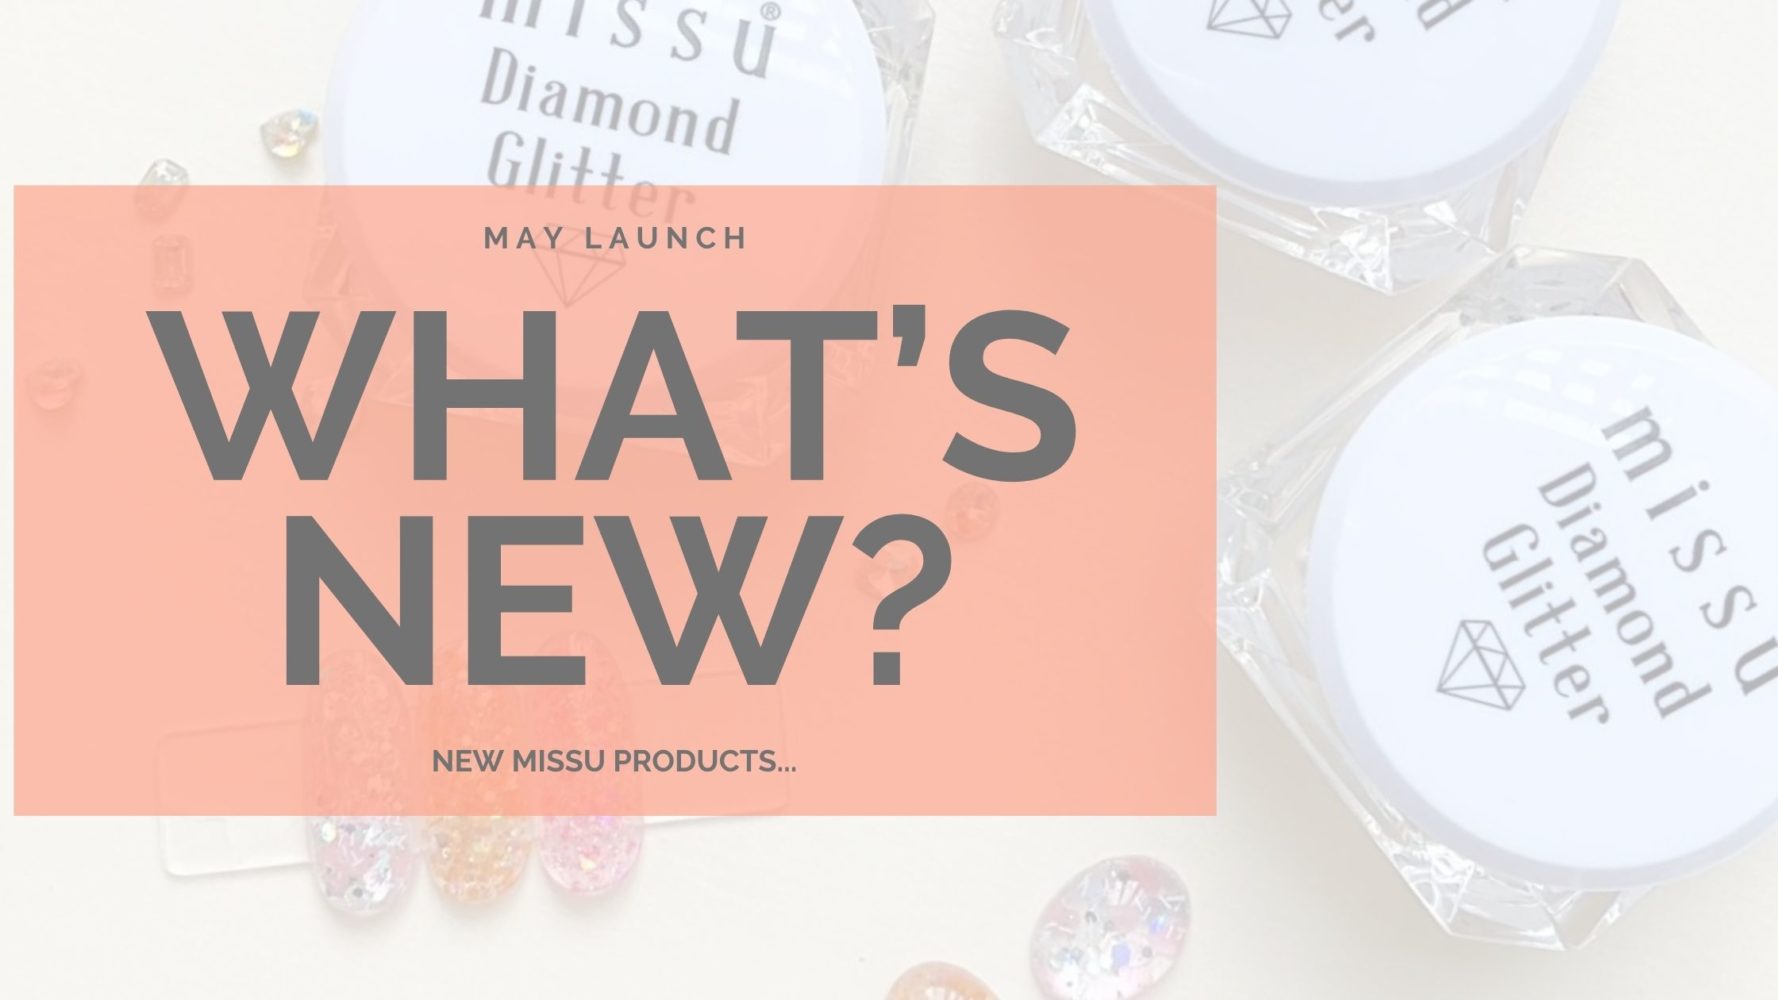 New missu Products